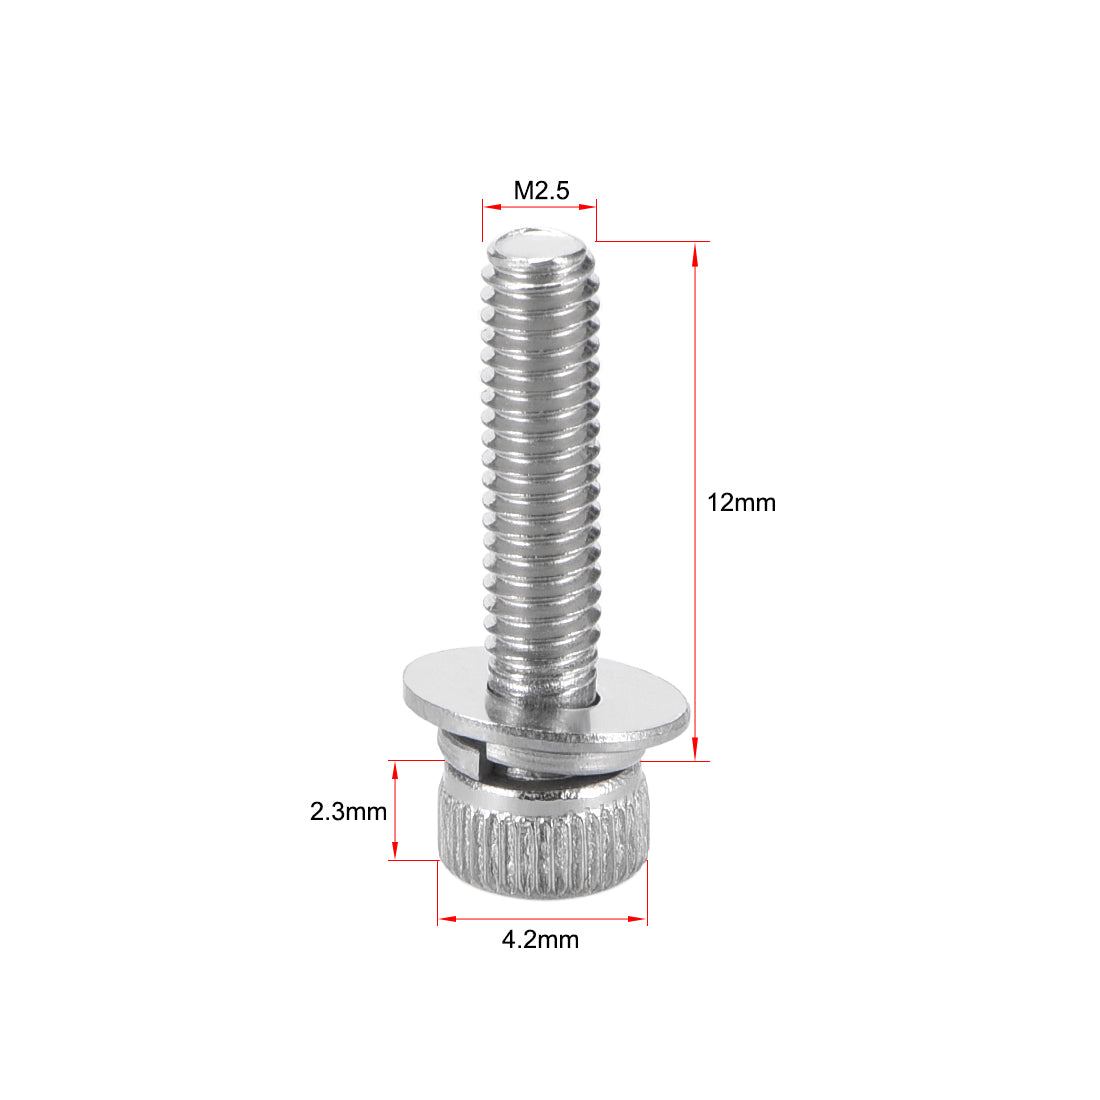 Uxcell Uxcell M4 x 12mm Stainless Steel Hex Socket Head Cap Screws Bolts Combine with Spring Washer and Plain Washers 10pcs